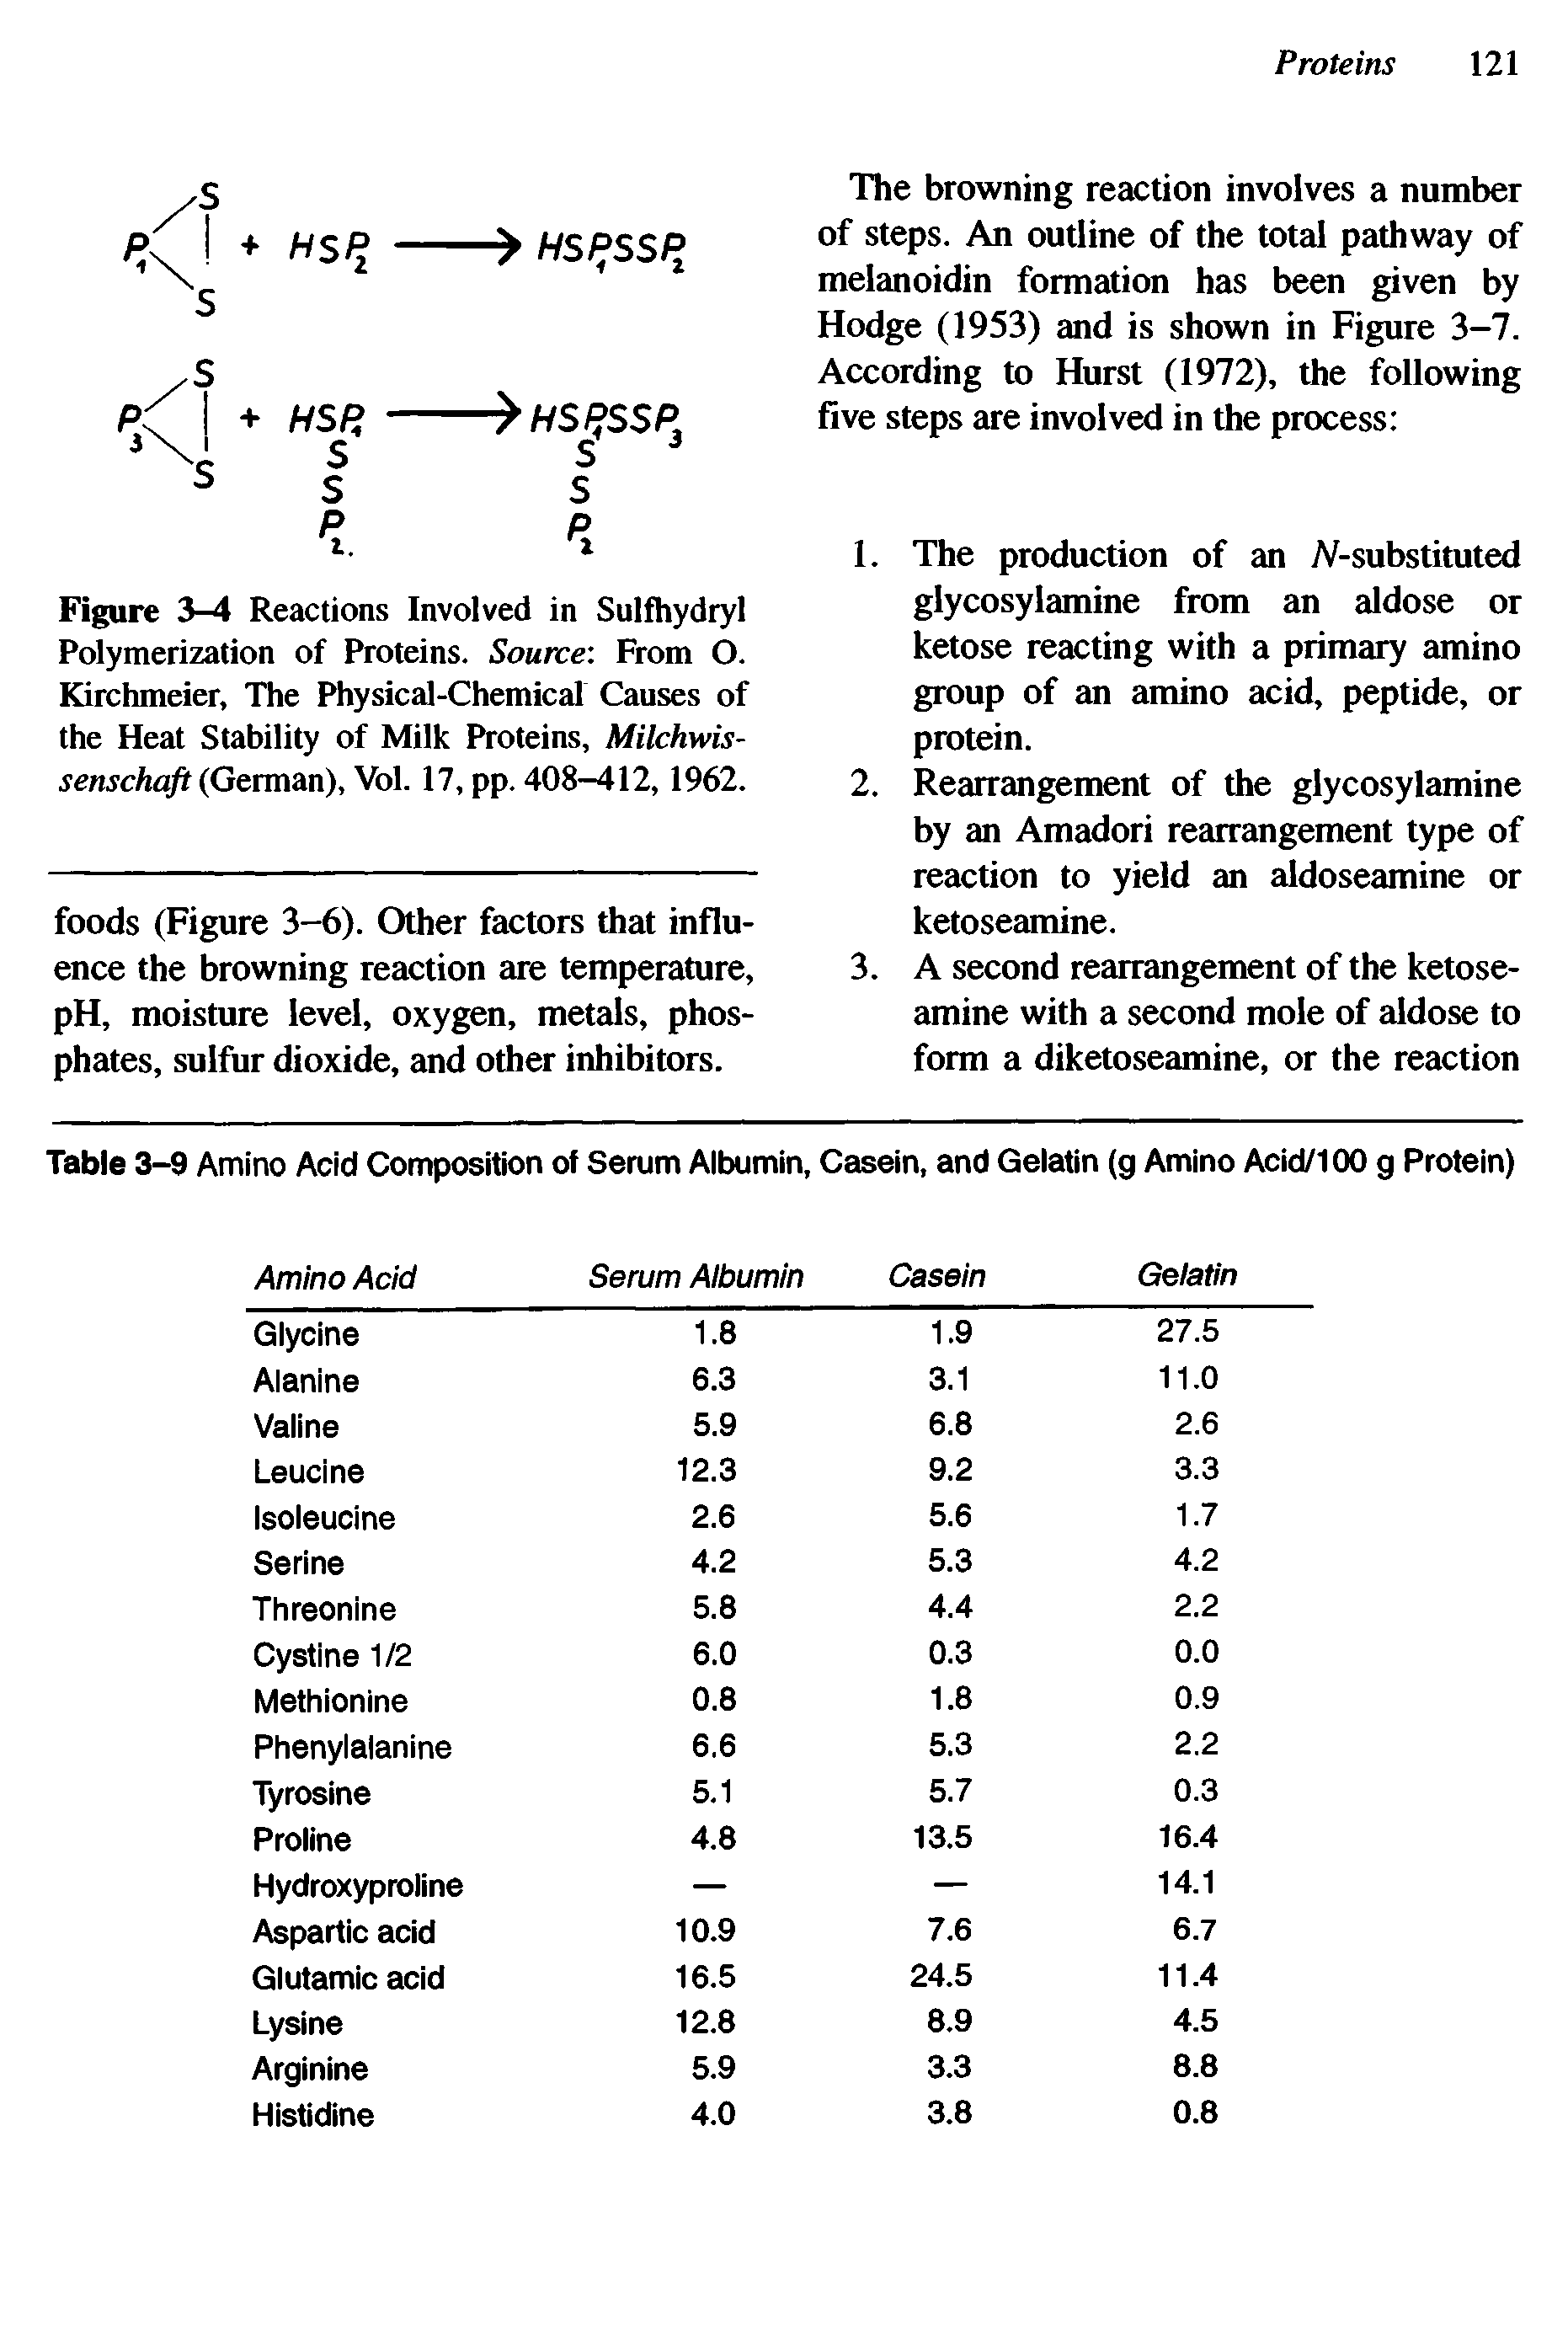 Figure 3-4 Reactions Involved in Sulfhydryl Polymerization of Proteins. Source From O. Kirchmeier, The Physical-Chemical Causes of the Heat Stability of Milk Proteins, Milchwis-senschaft (German), Vol. 17, pp. 408-412,1962.